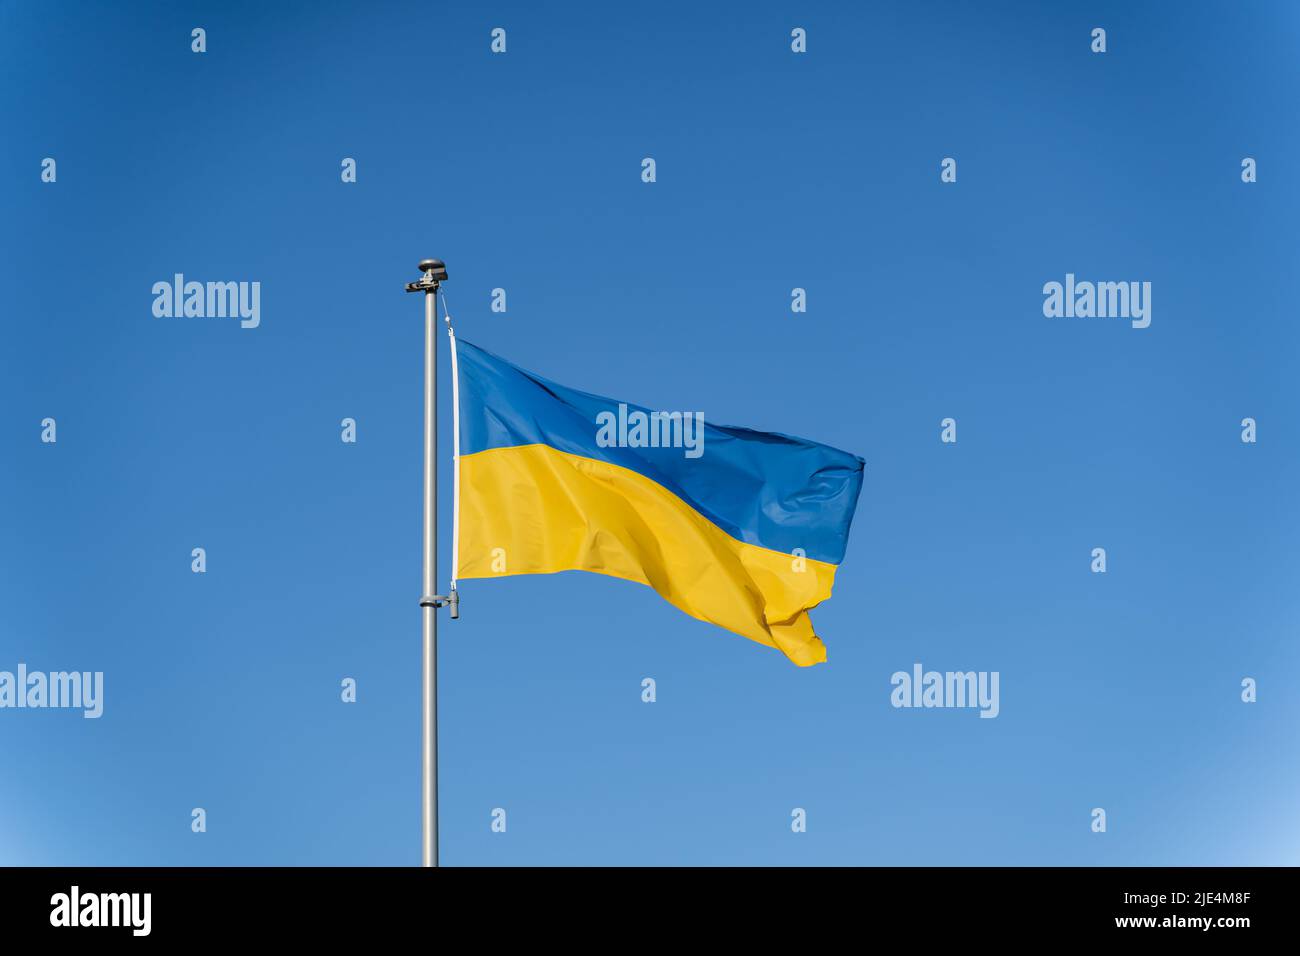 Ukrainian flag of yellow-blue colors on the background of clear blue sky. Stock Photo